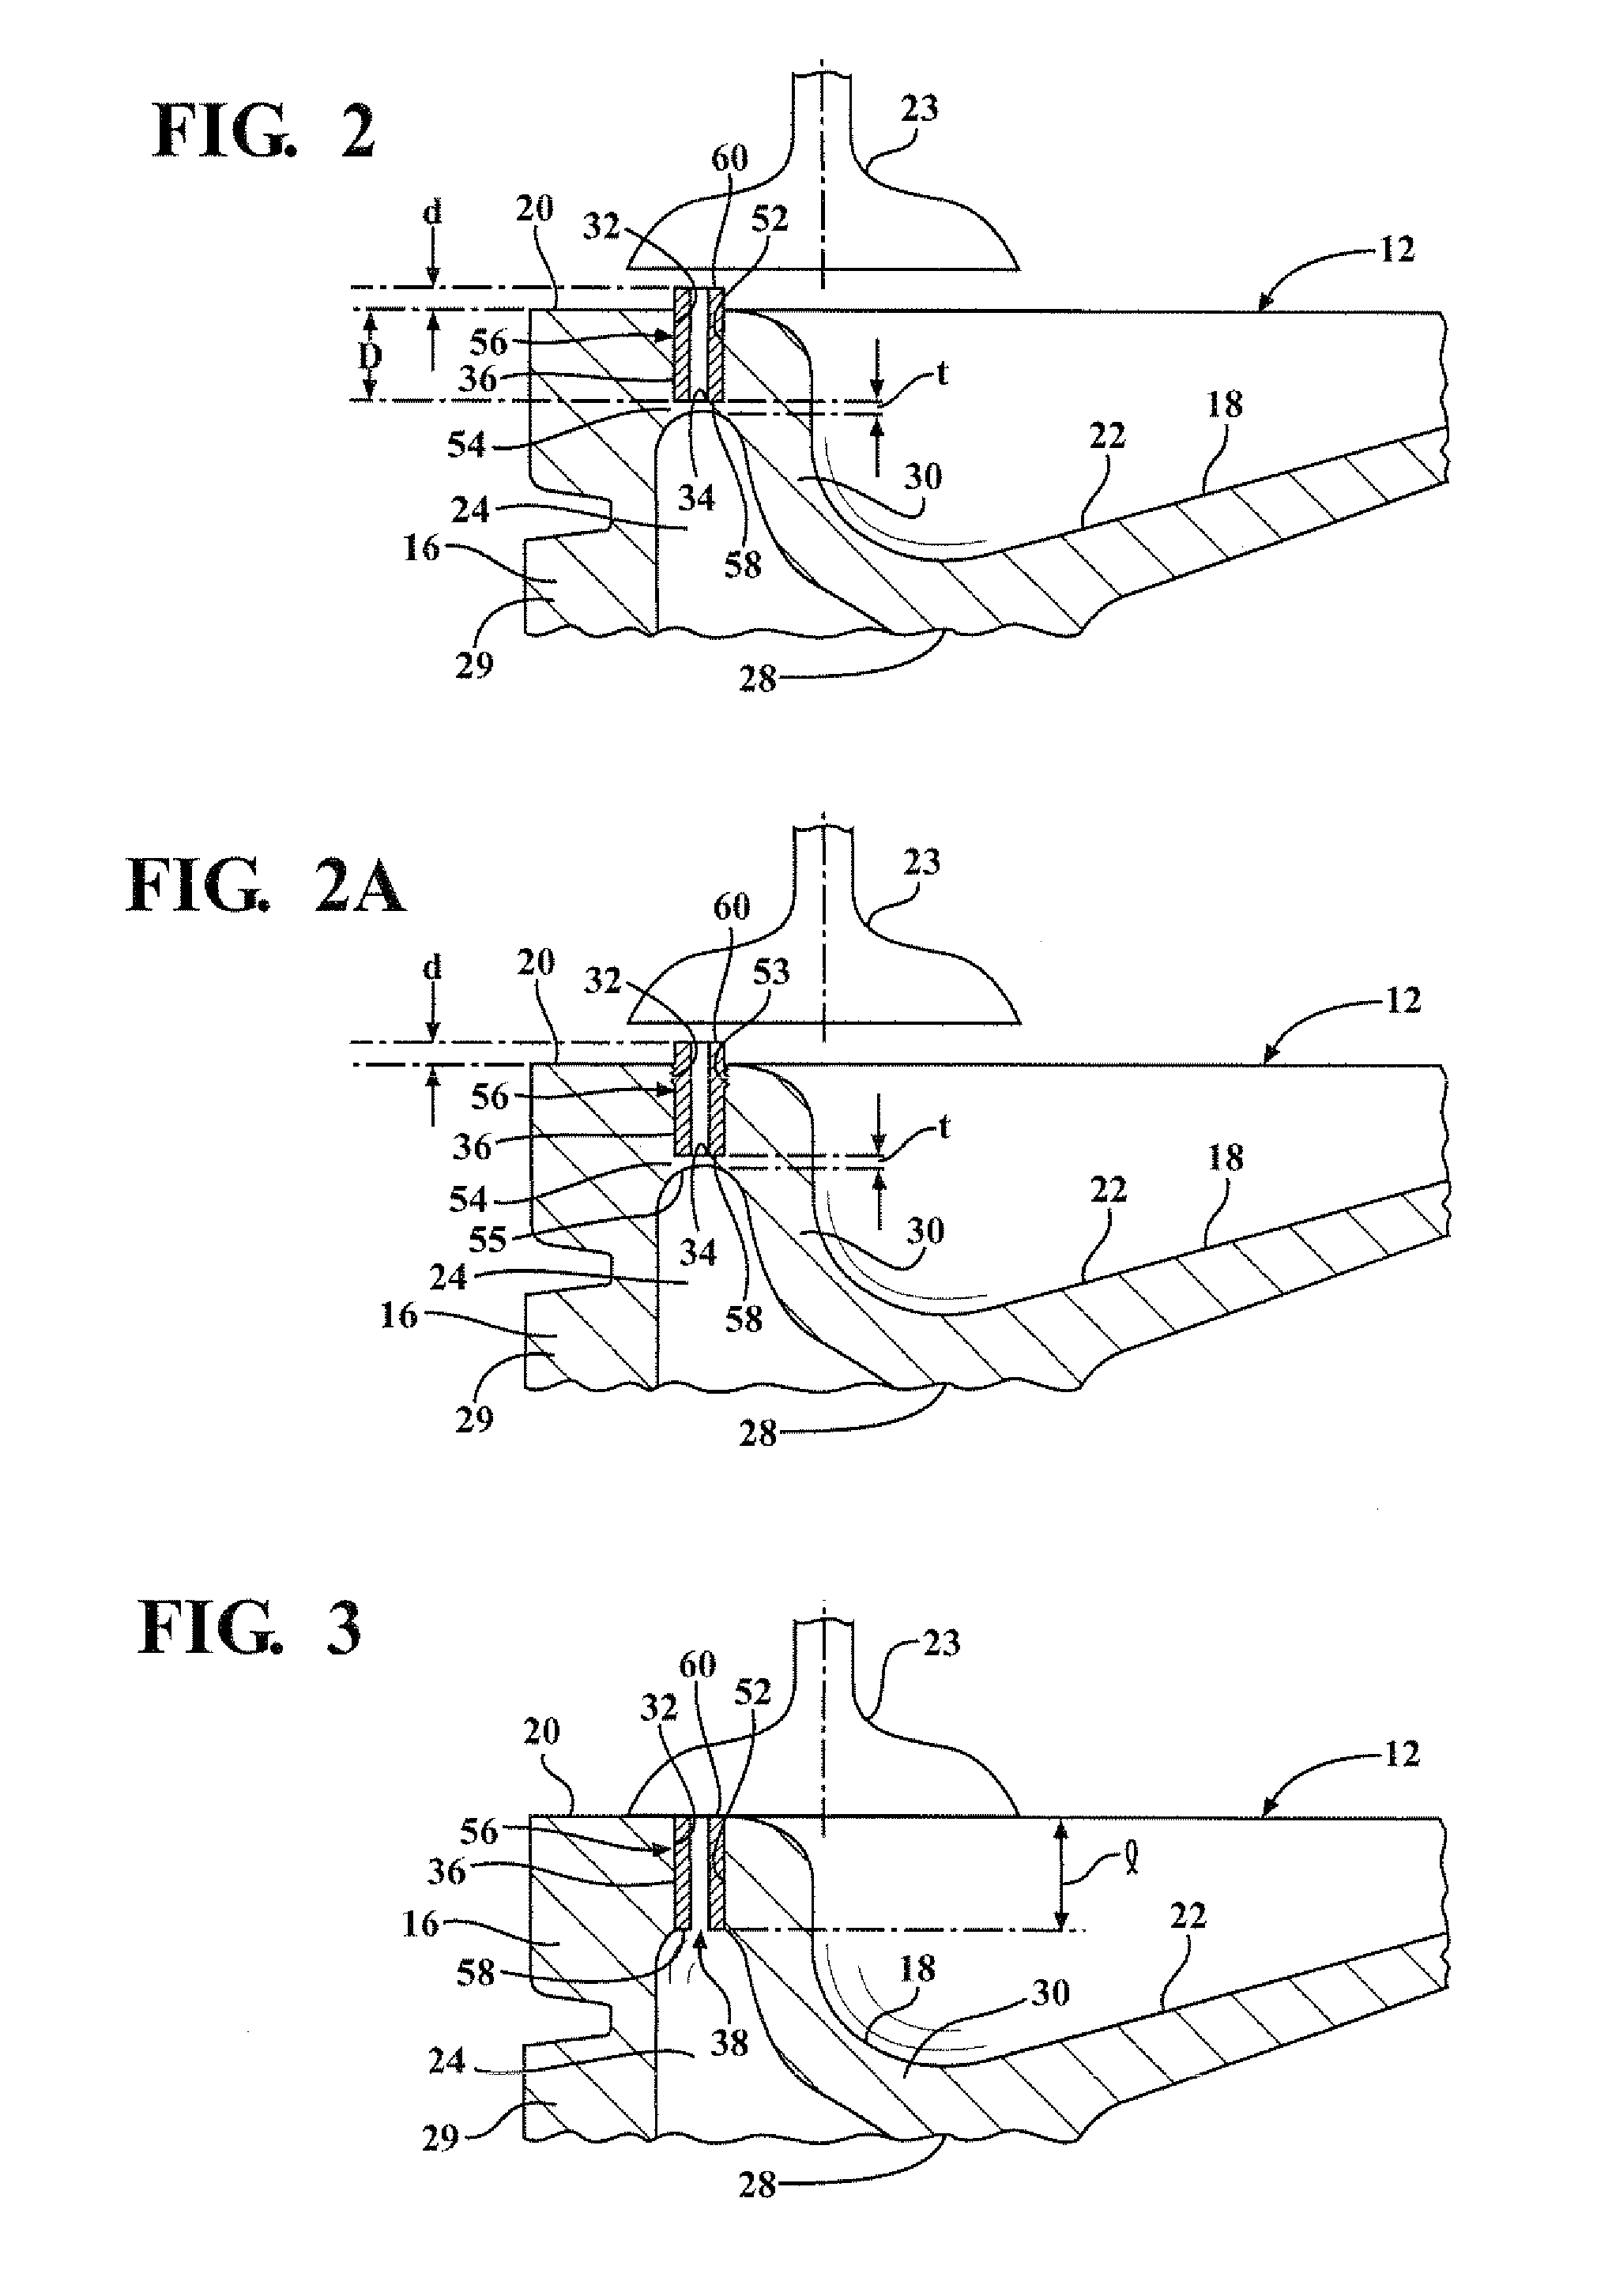 Piston with blow-by feature and method of preventing catastrophic failure to an internal combustion engine